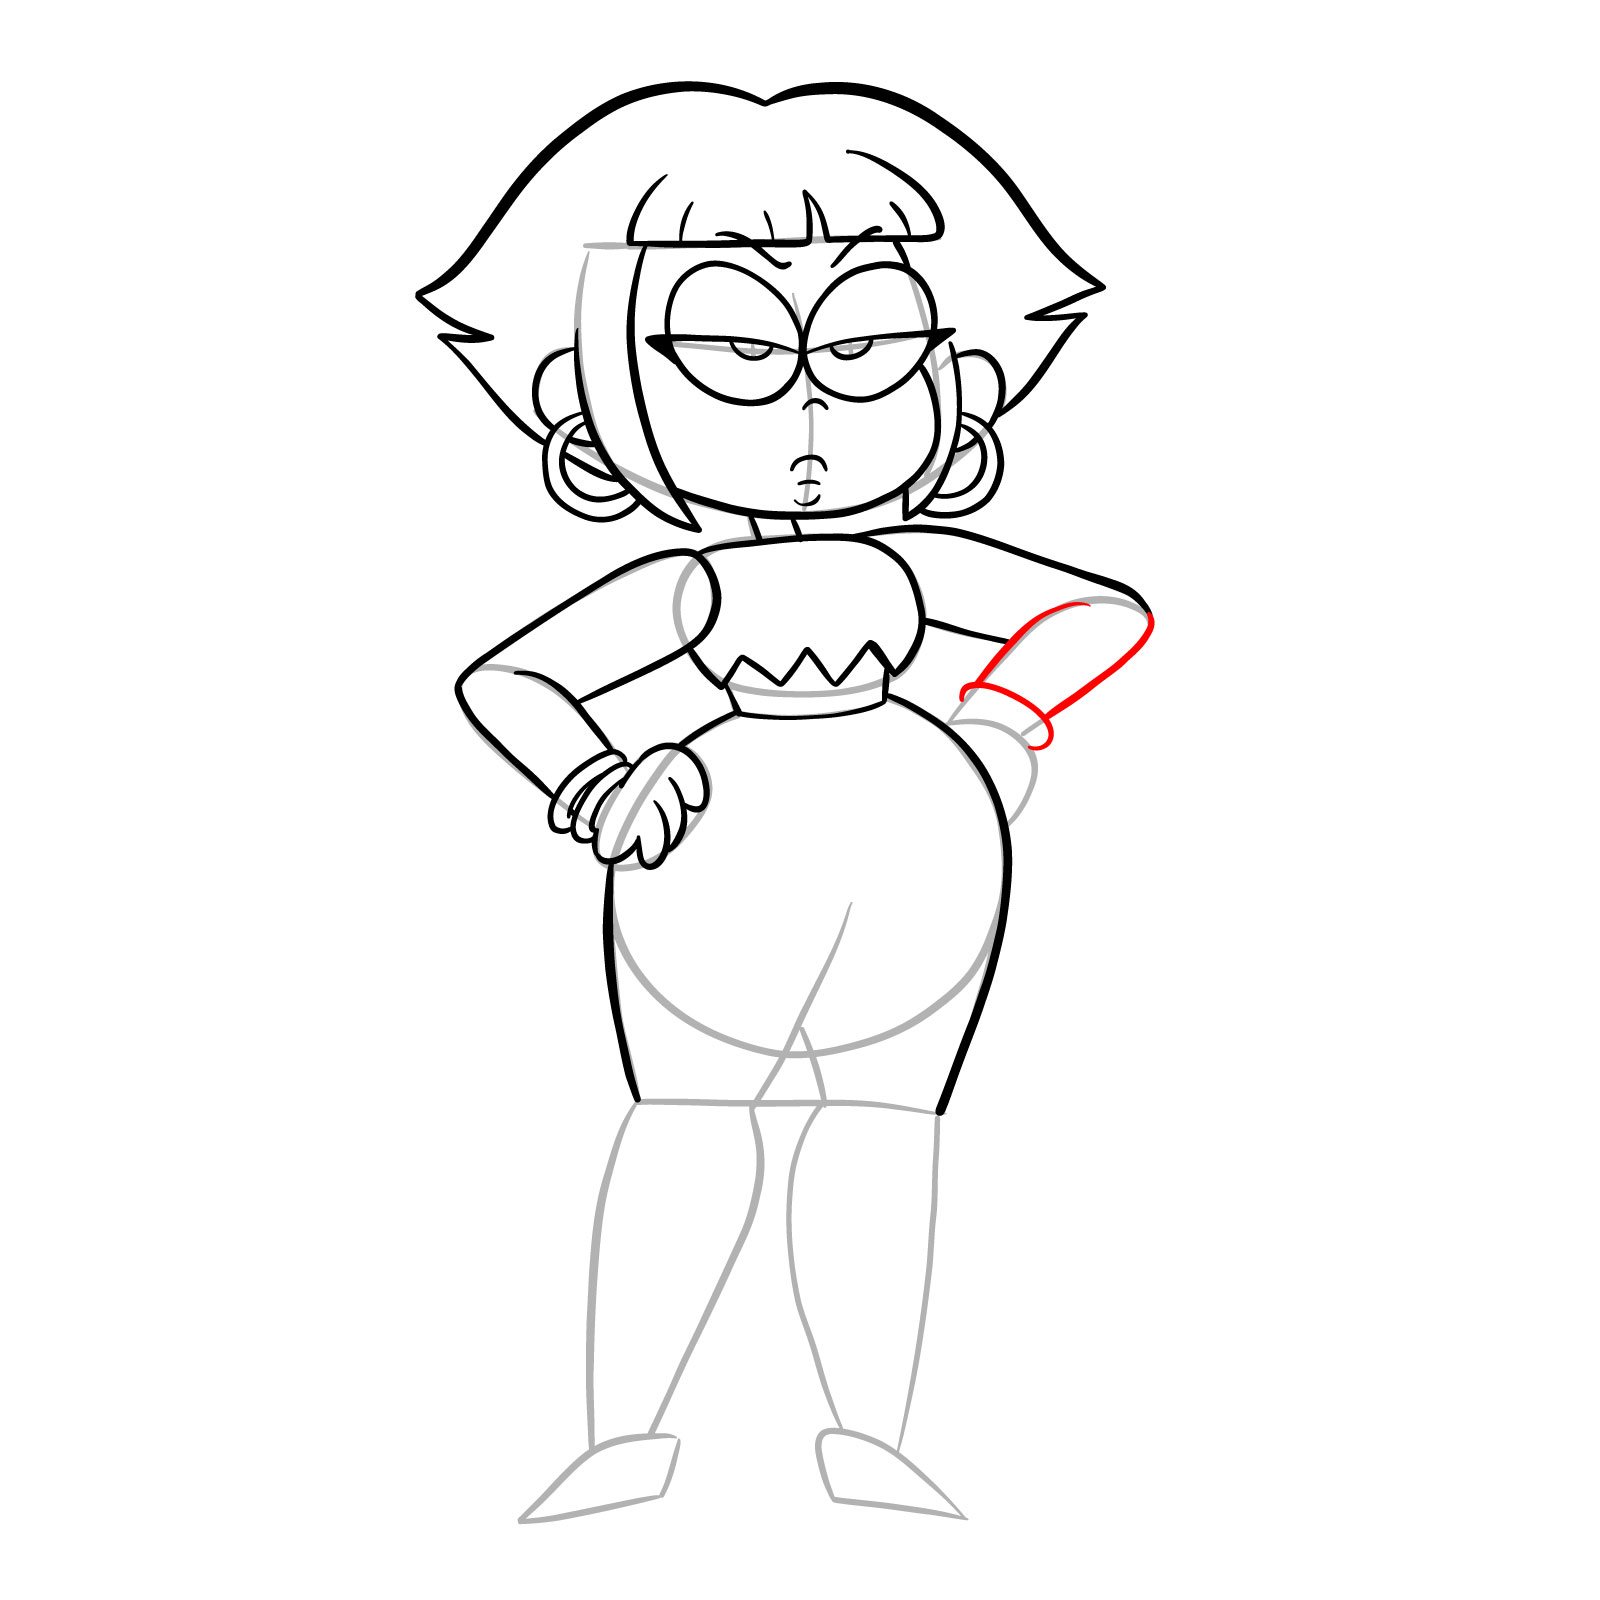 How to draw Human Shannon from OK K.O.! - step 23